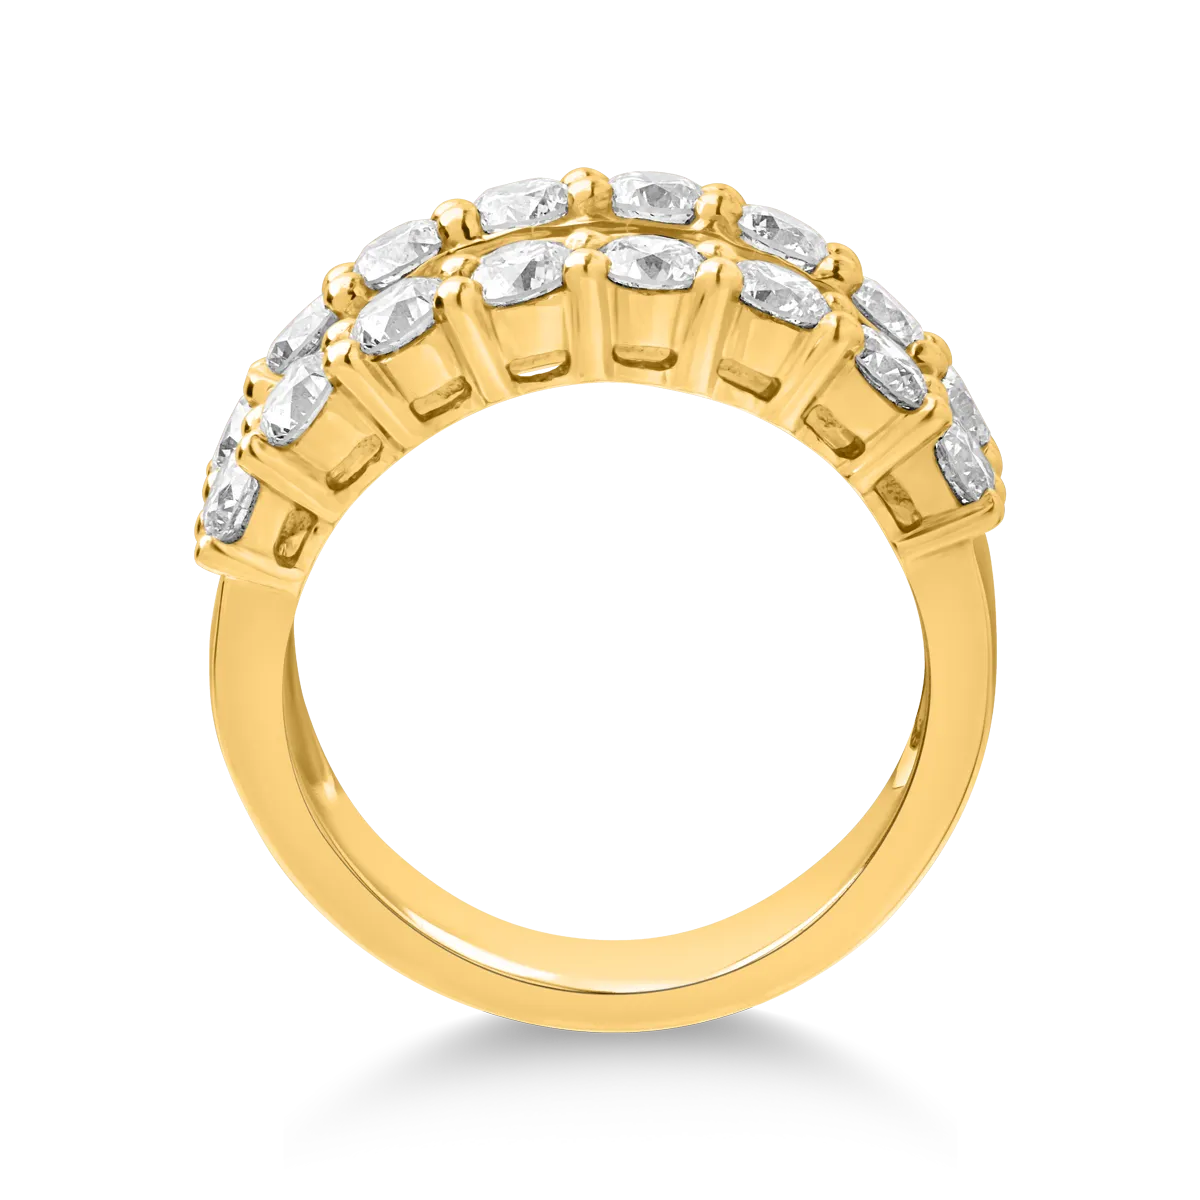 18K yellow gold ring with 3.18ct diamonds